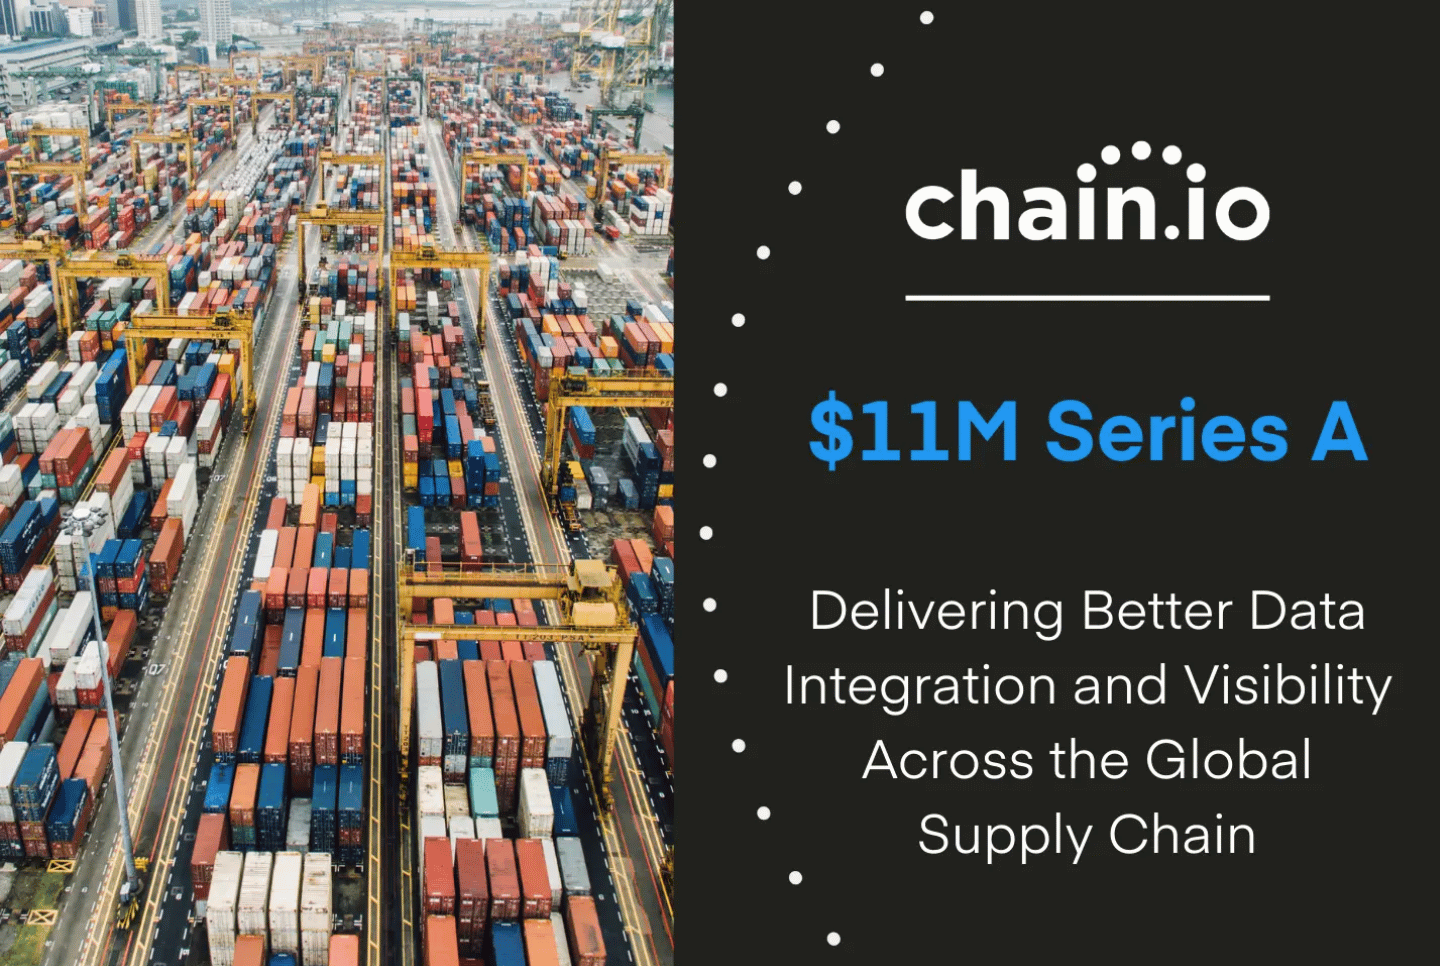 Announcing our $11M Series A Funding to Deliver Better Data Integrations and Supply Chain Visibility